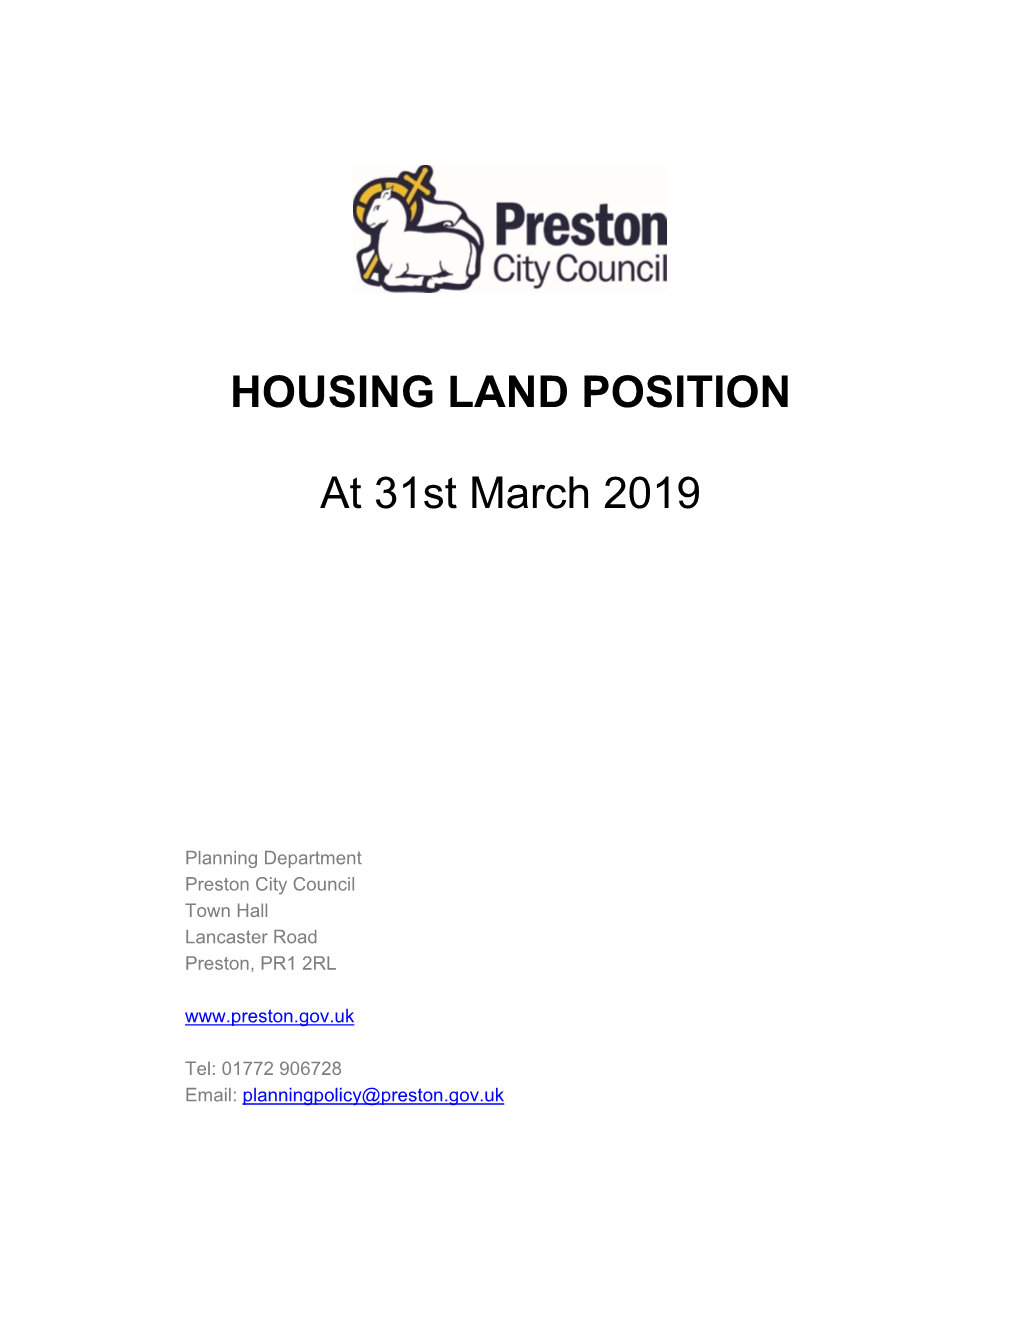 Housing Land Position at 31St March 2019